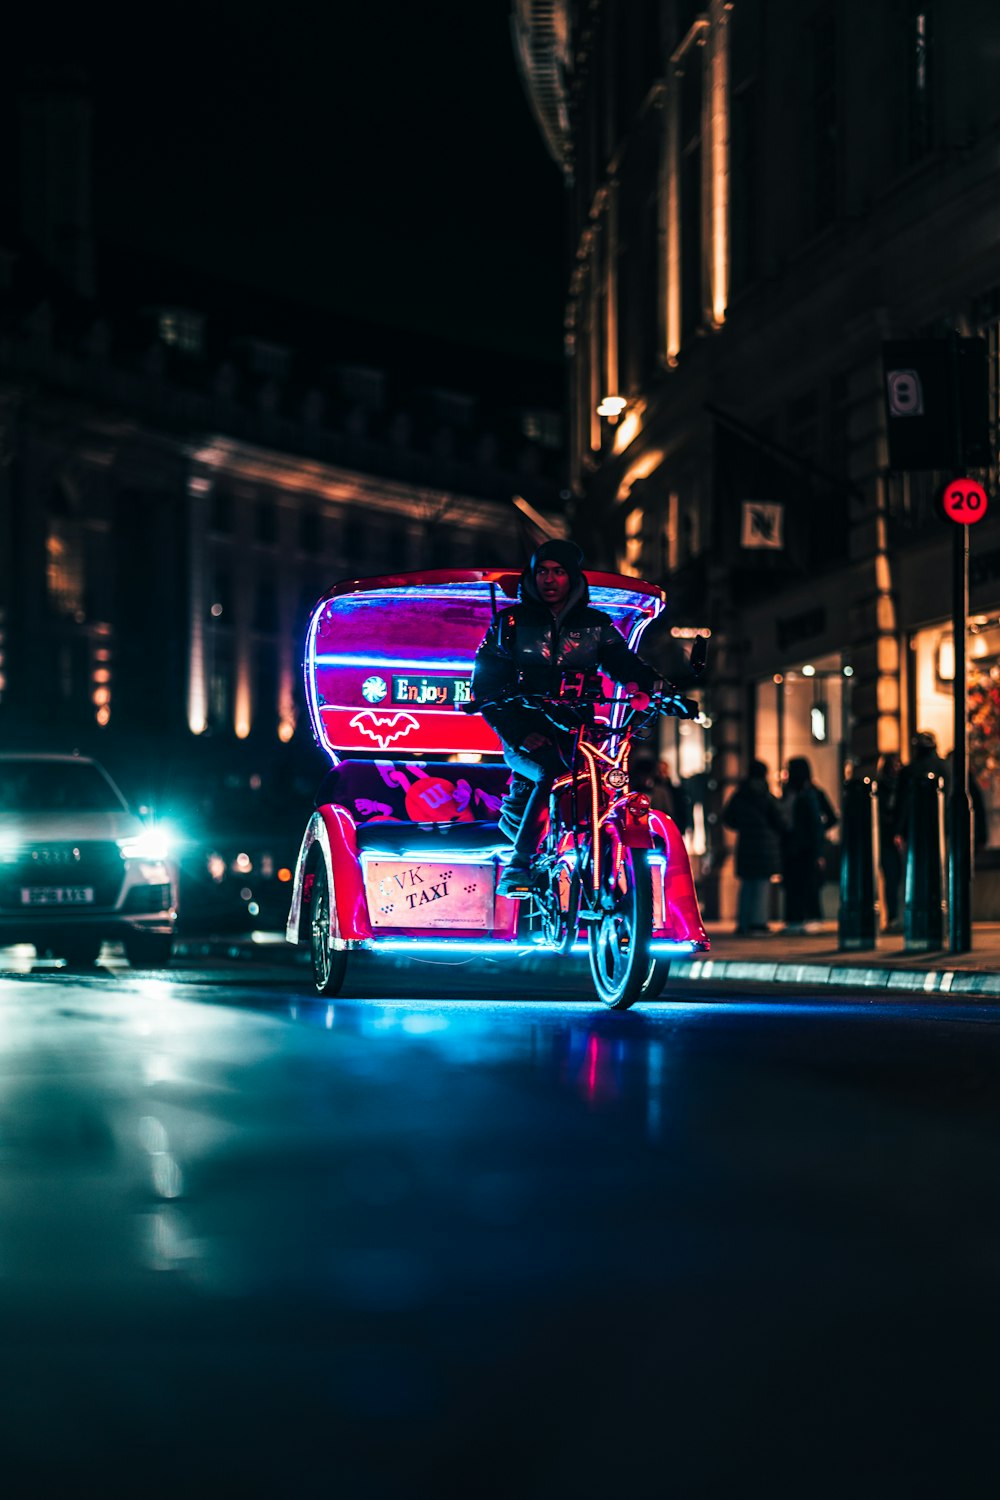 a person riding a motorcycle on a city street at night